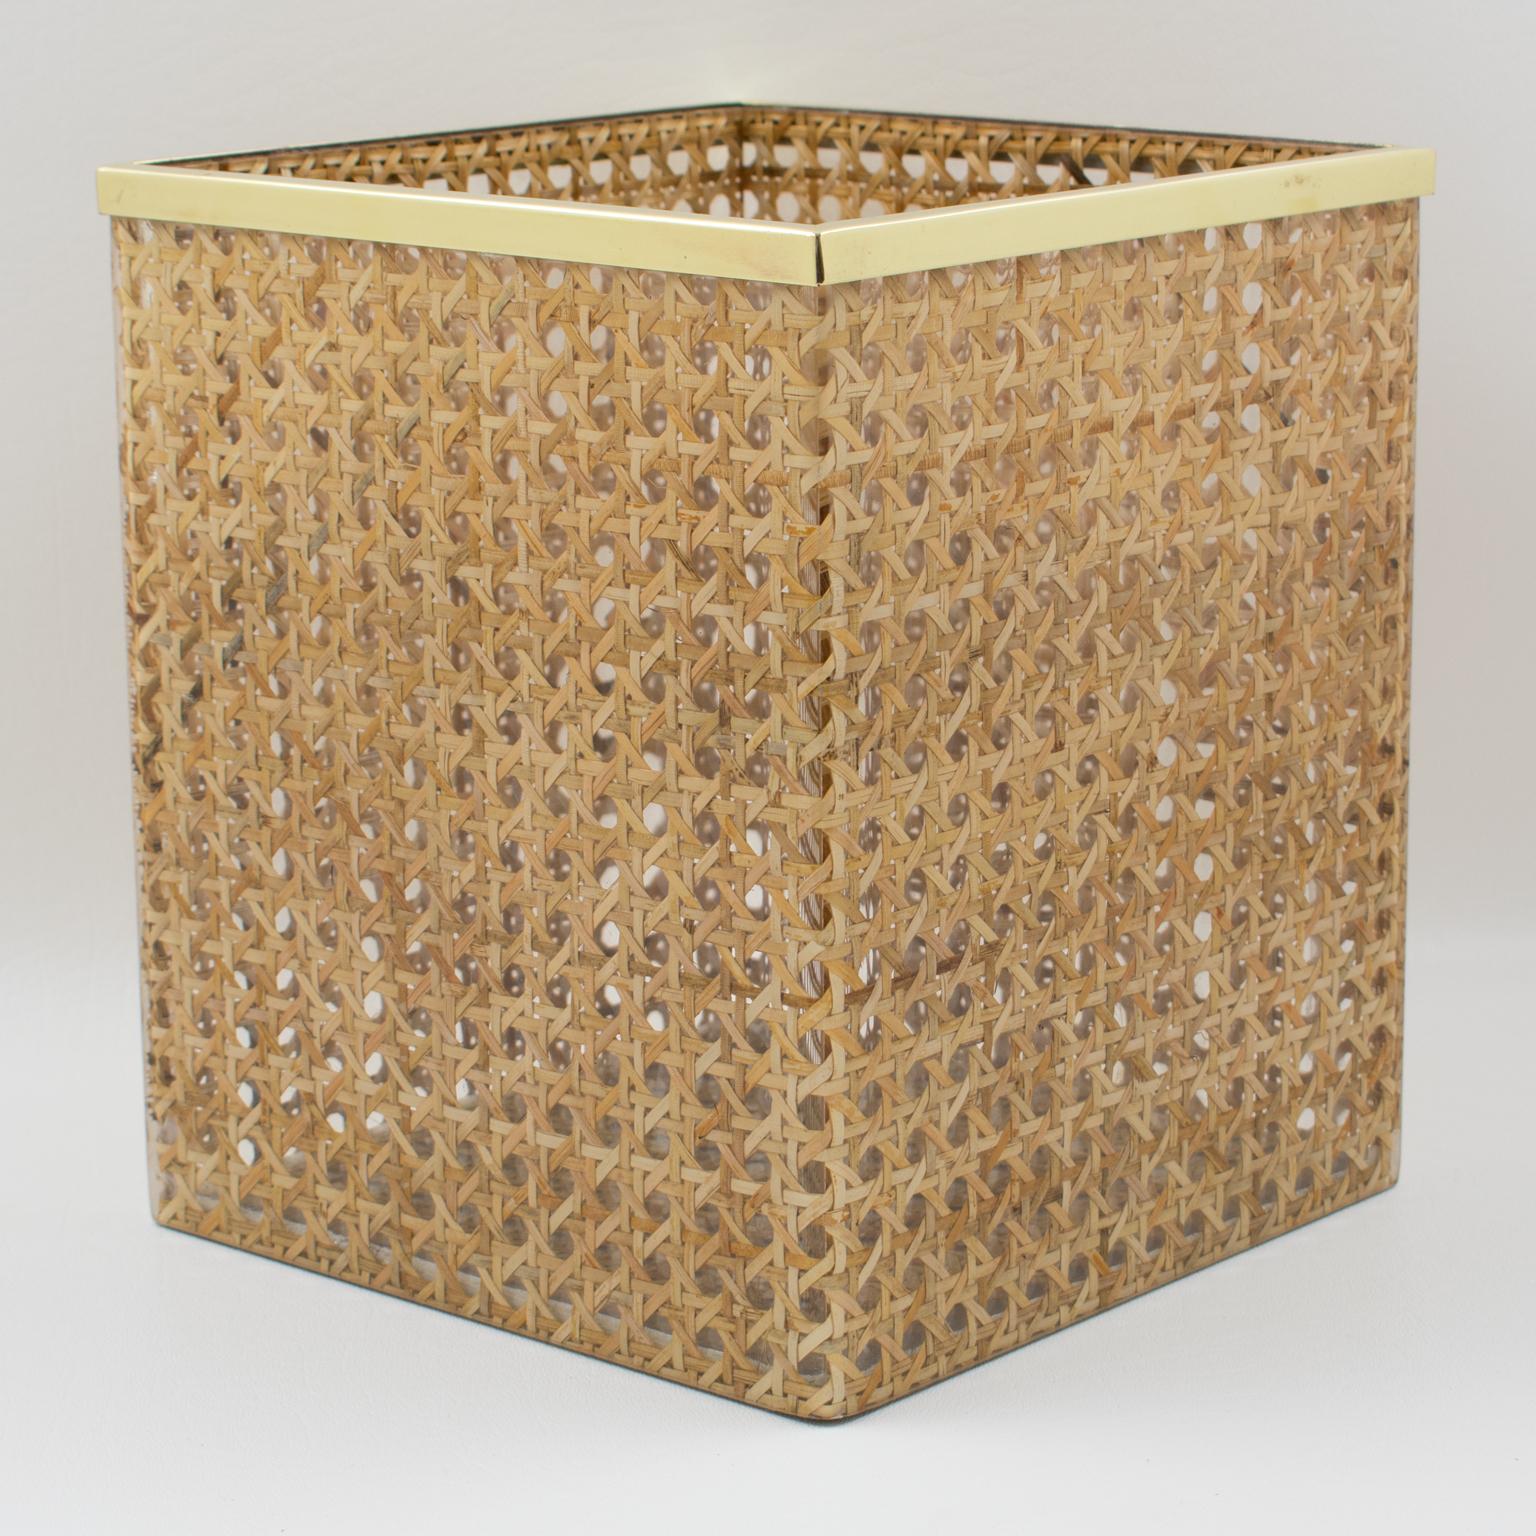 French Christian Dior Home Collection 1970s Lucite and Rattan Waste Basket